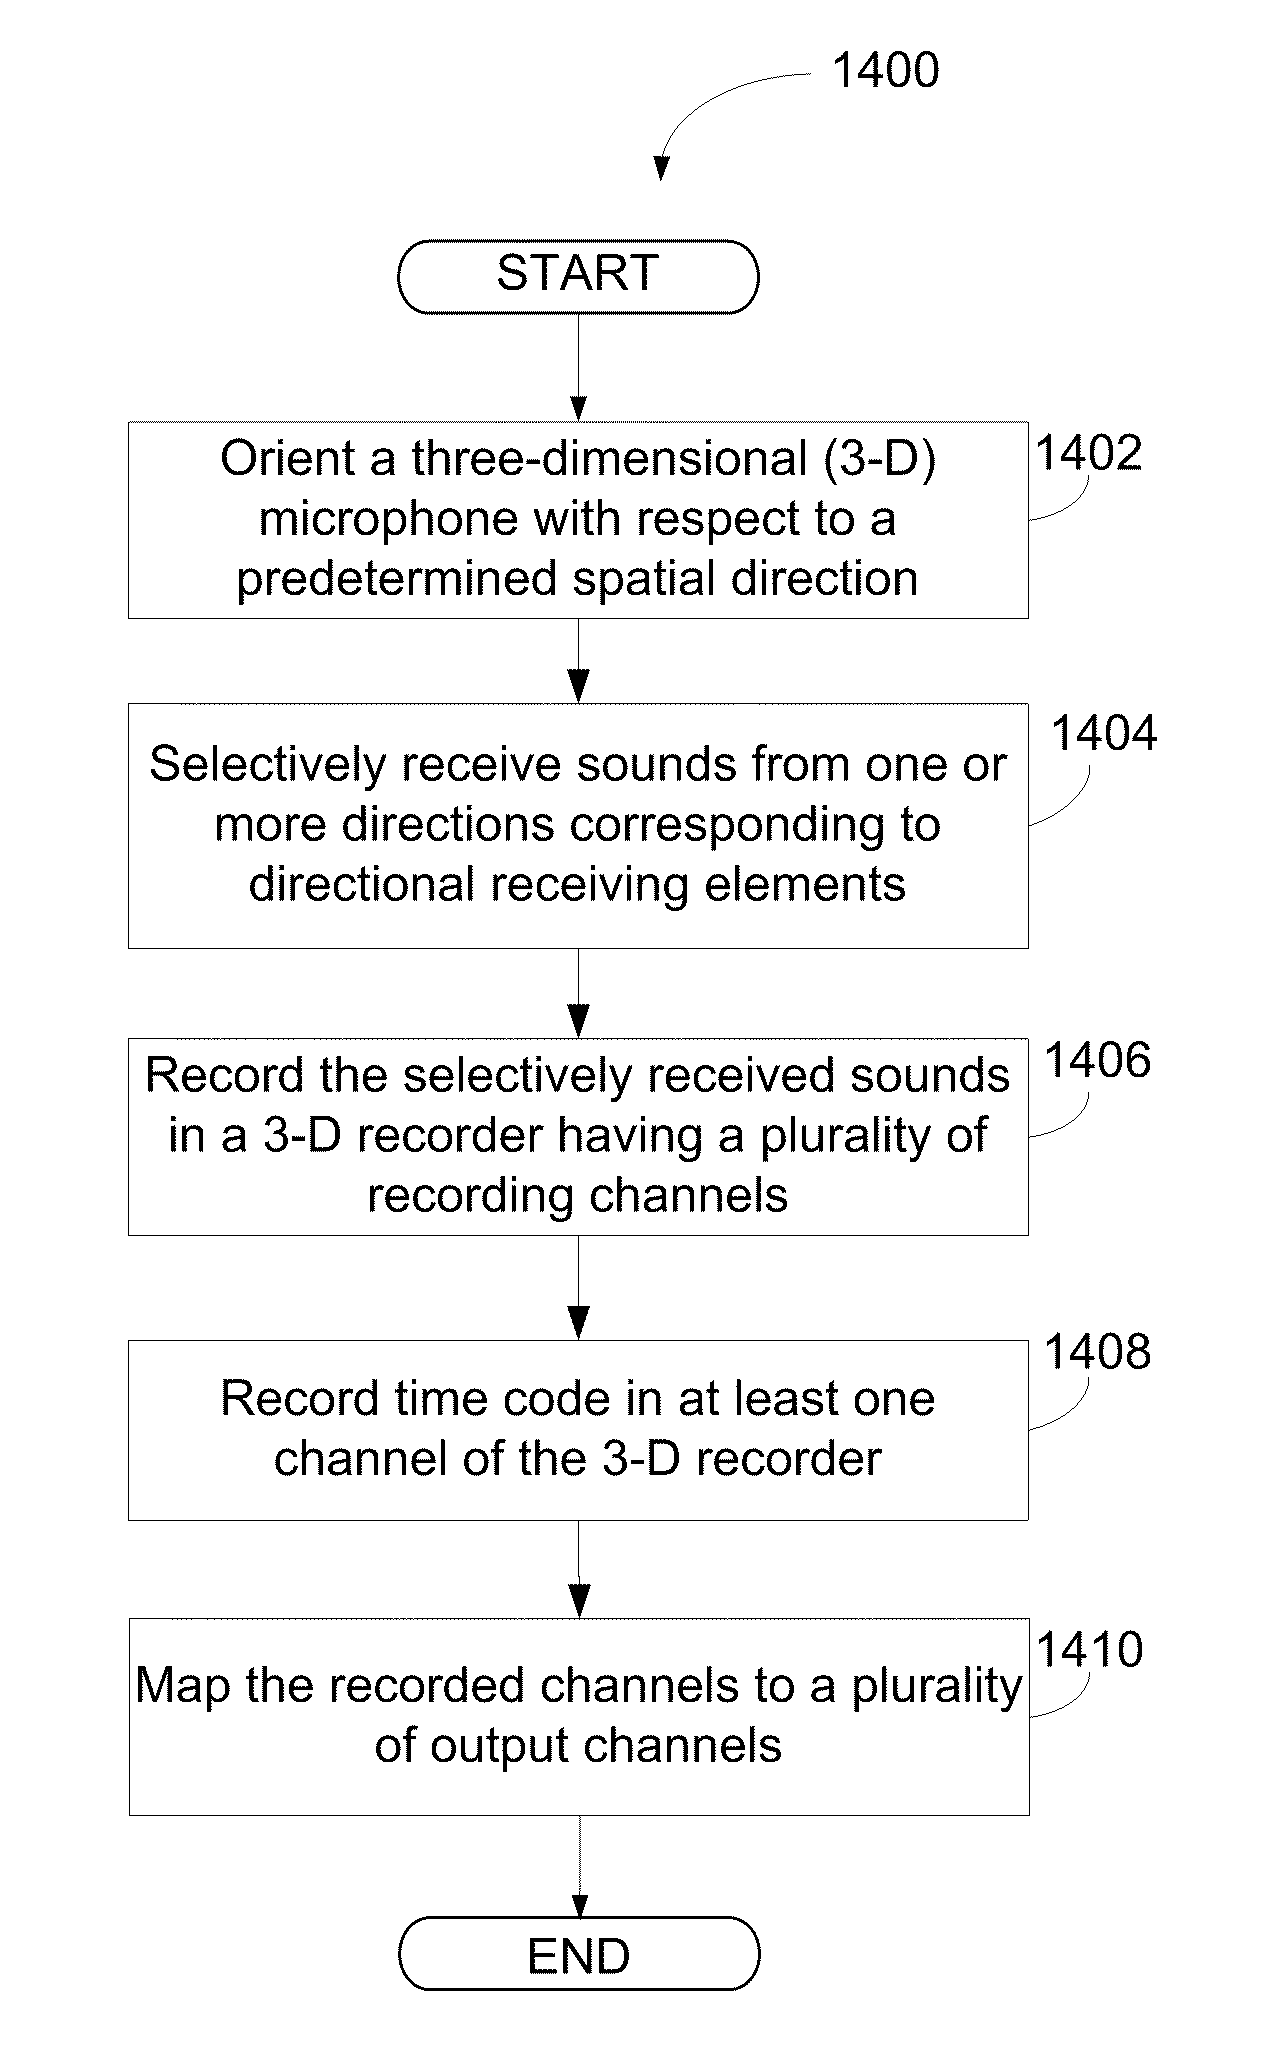 Systems, methods, and apparatus for controlling sounds in a three-dimensional listening environment